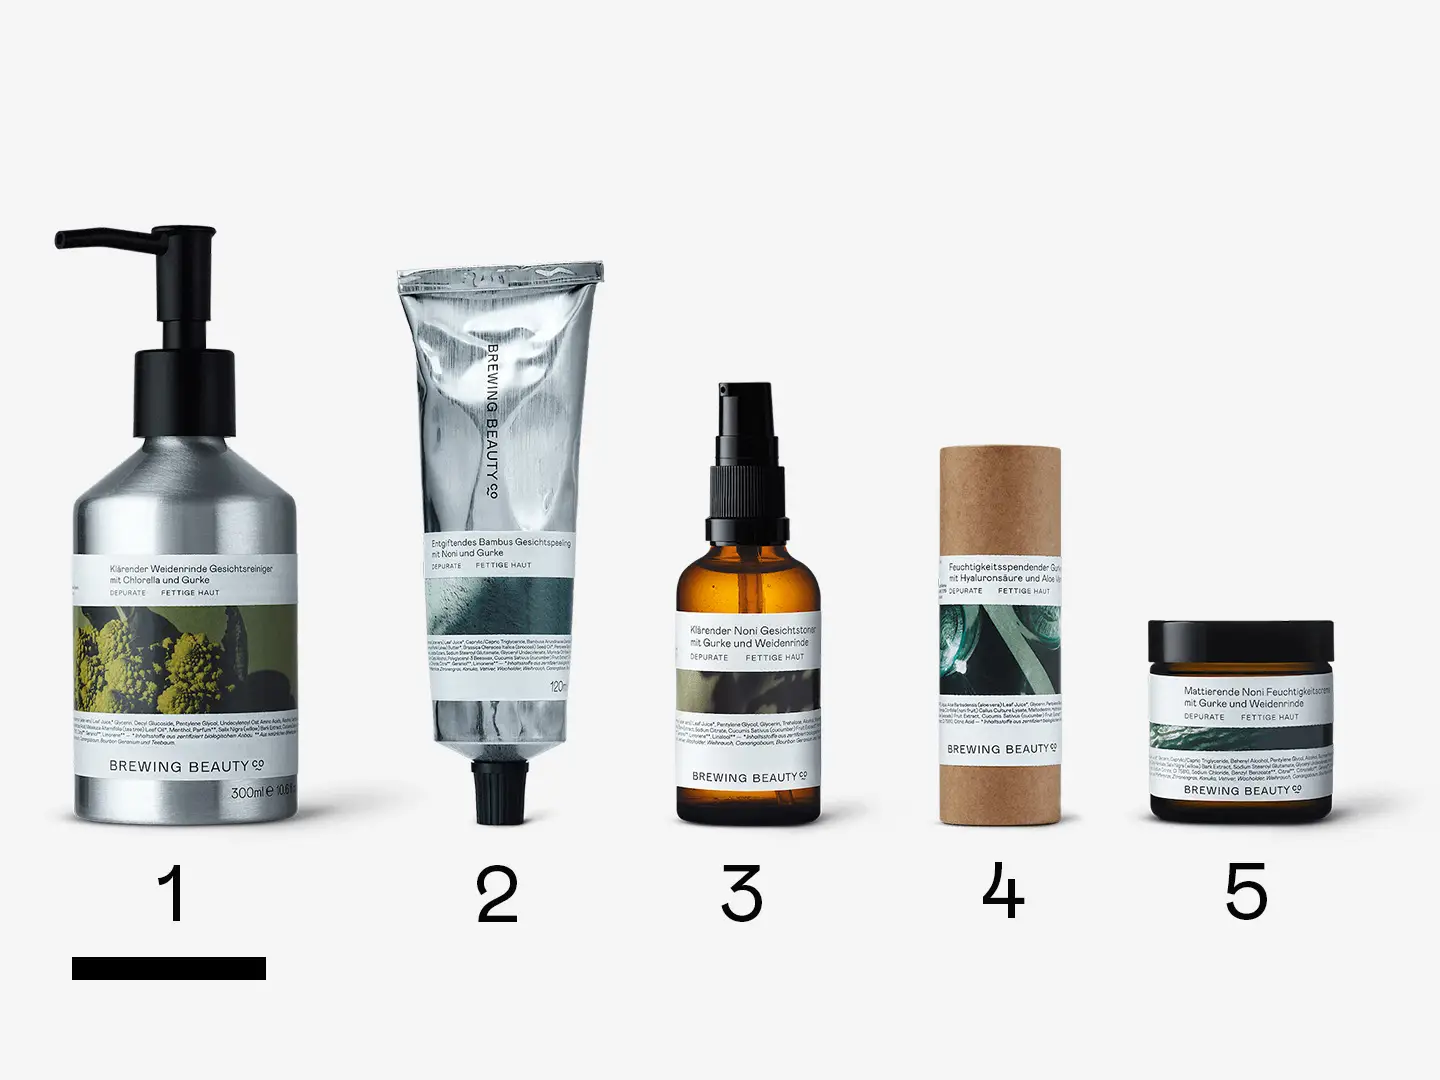 A lineup of Brewing Beauty products representing Routine No.21 